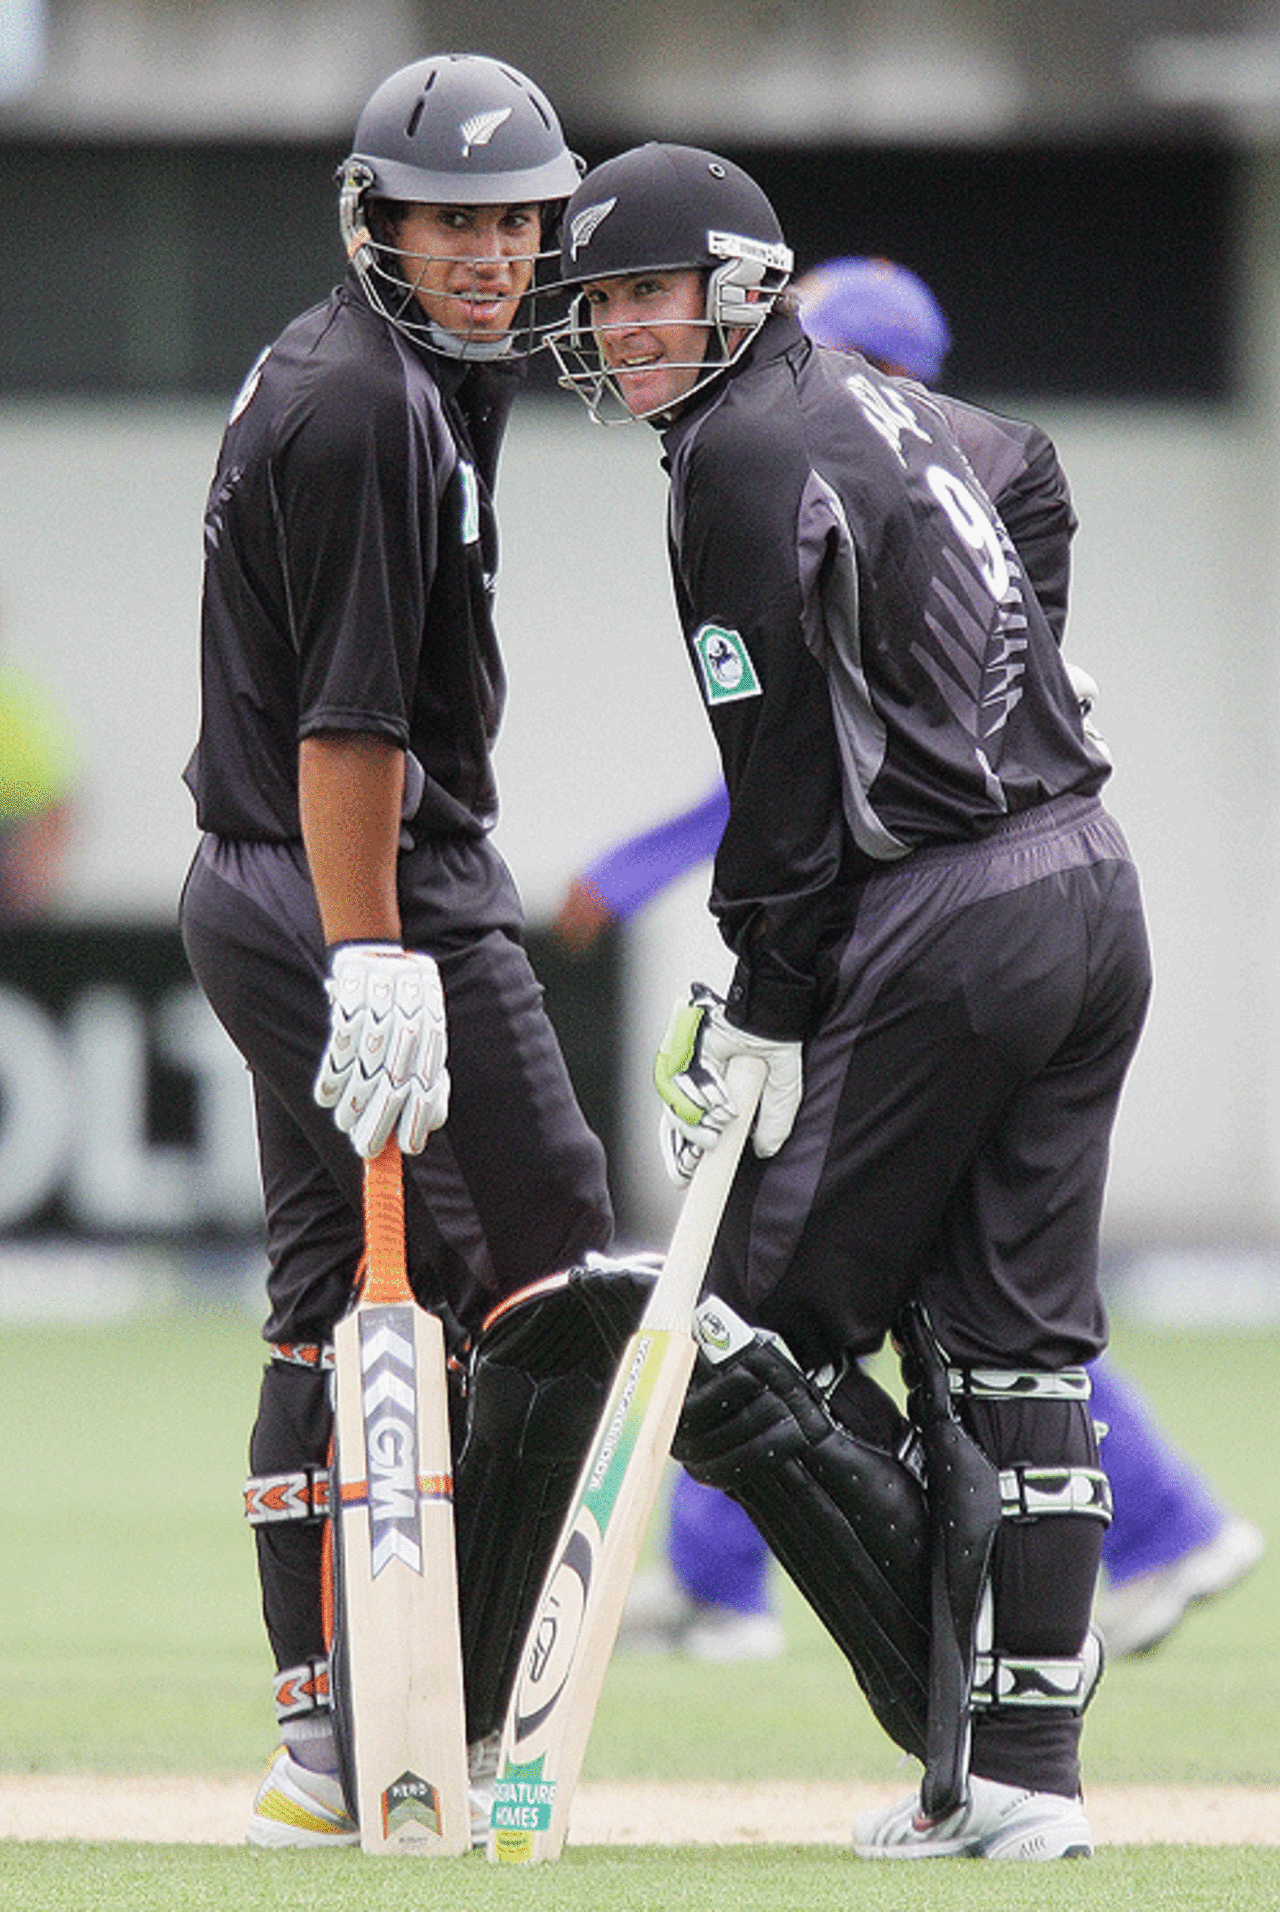 Rookie and veteran added 151 for the second wicket in good time, New Zealand v Sri Lanka, 1st ODI, Napier, December 28, 2006